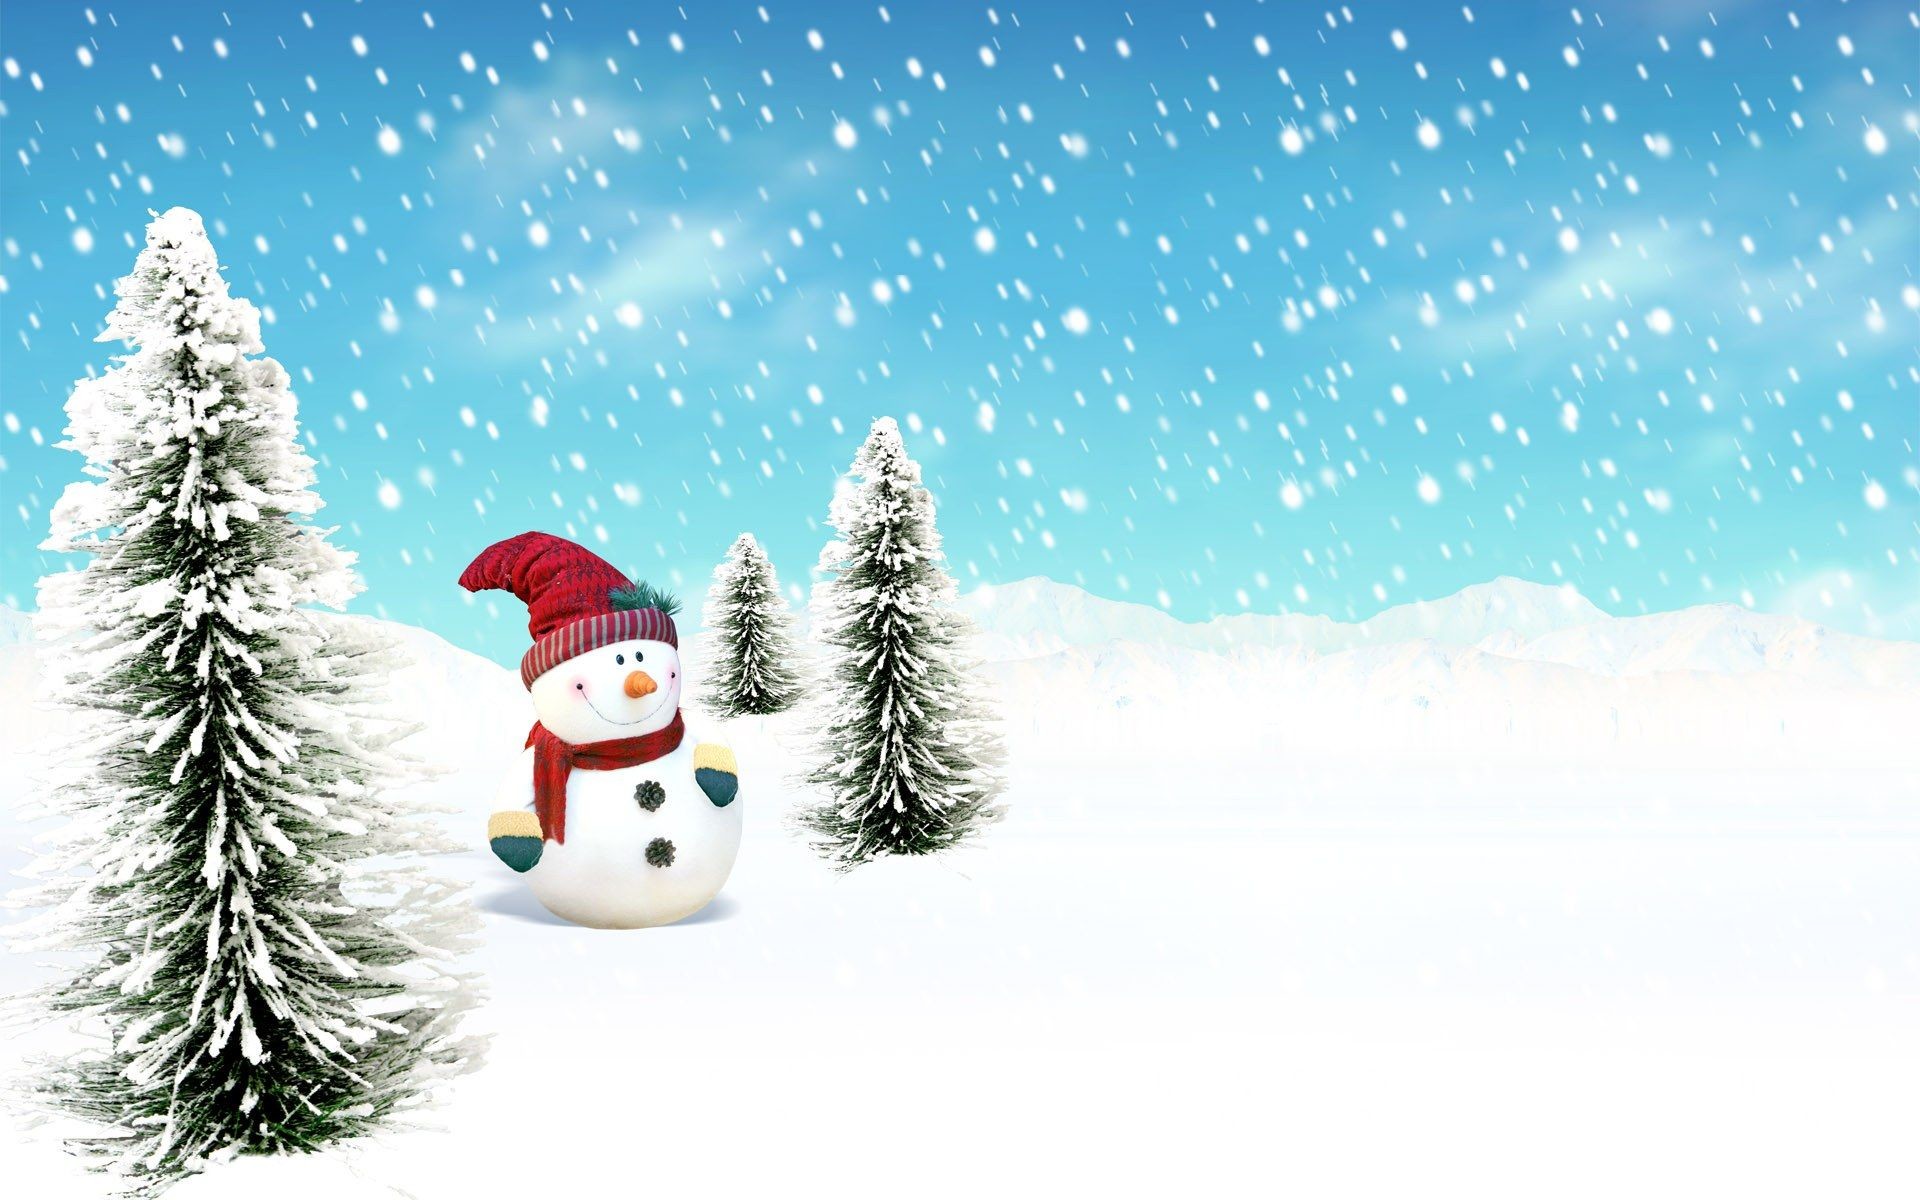 1920x1200 Xmas Background Images, KD219 HD Wallpapers For Desktop And Mobile